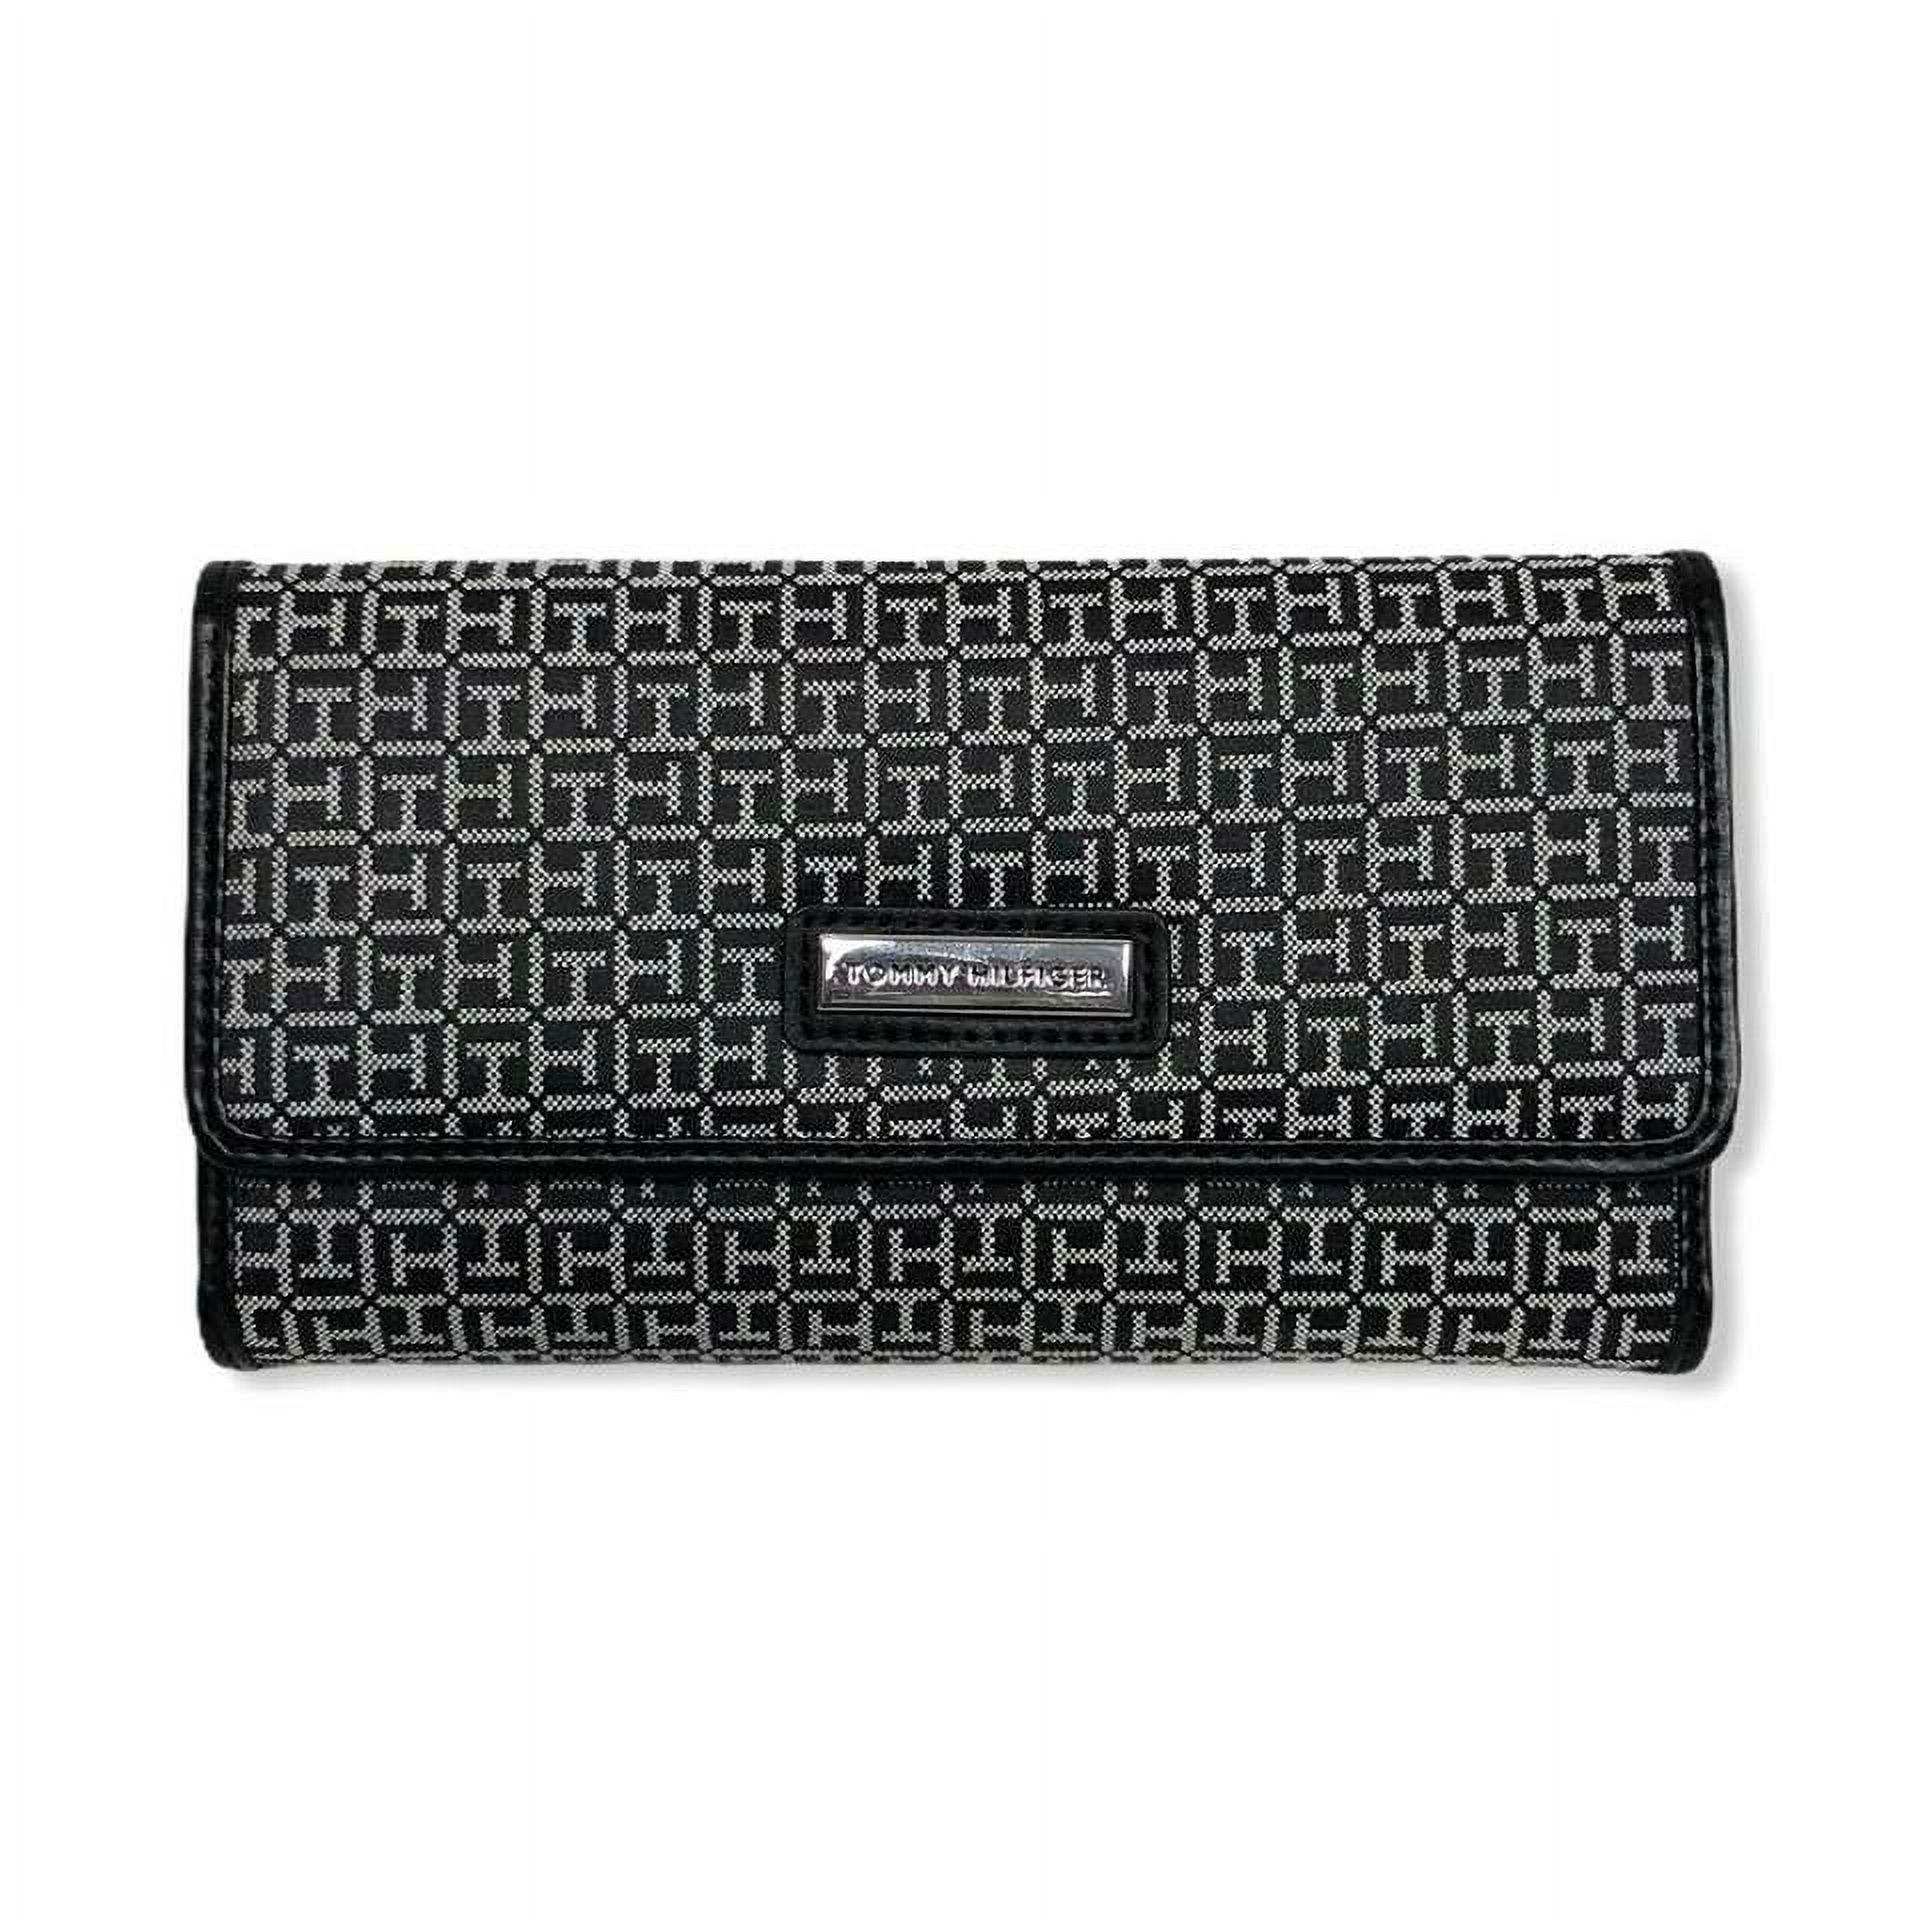 Tommy Hilfiger Womens Wallet Snap Closure Trifold Casual Checkbook - Black TH Monogram - image 1 of 3